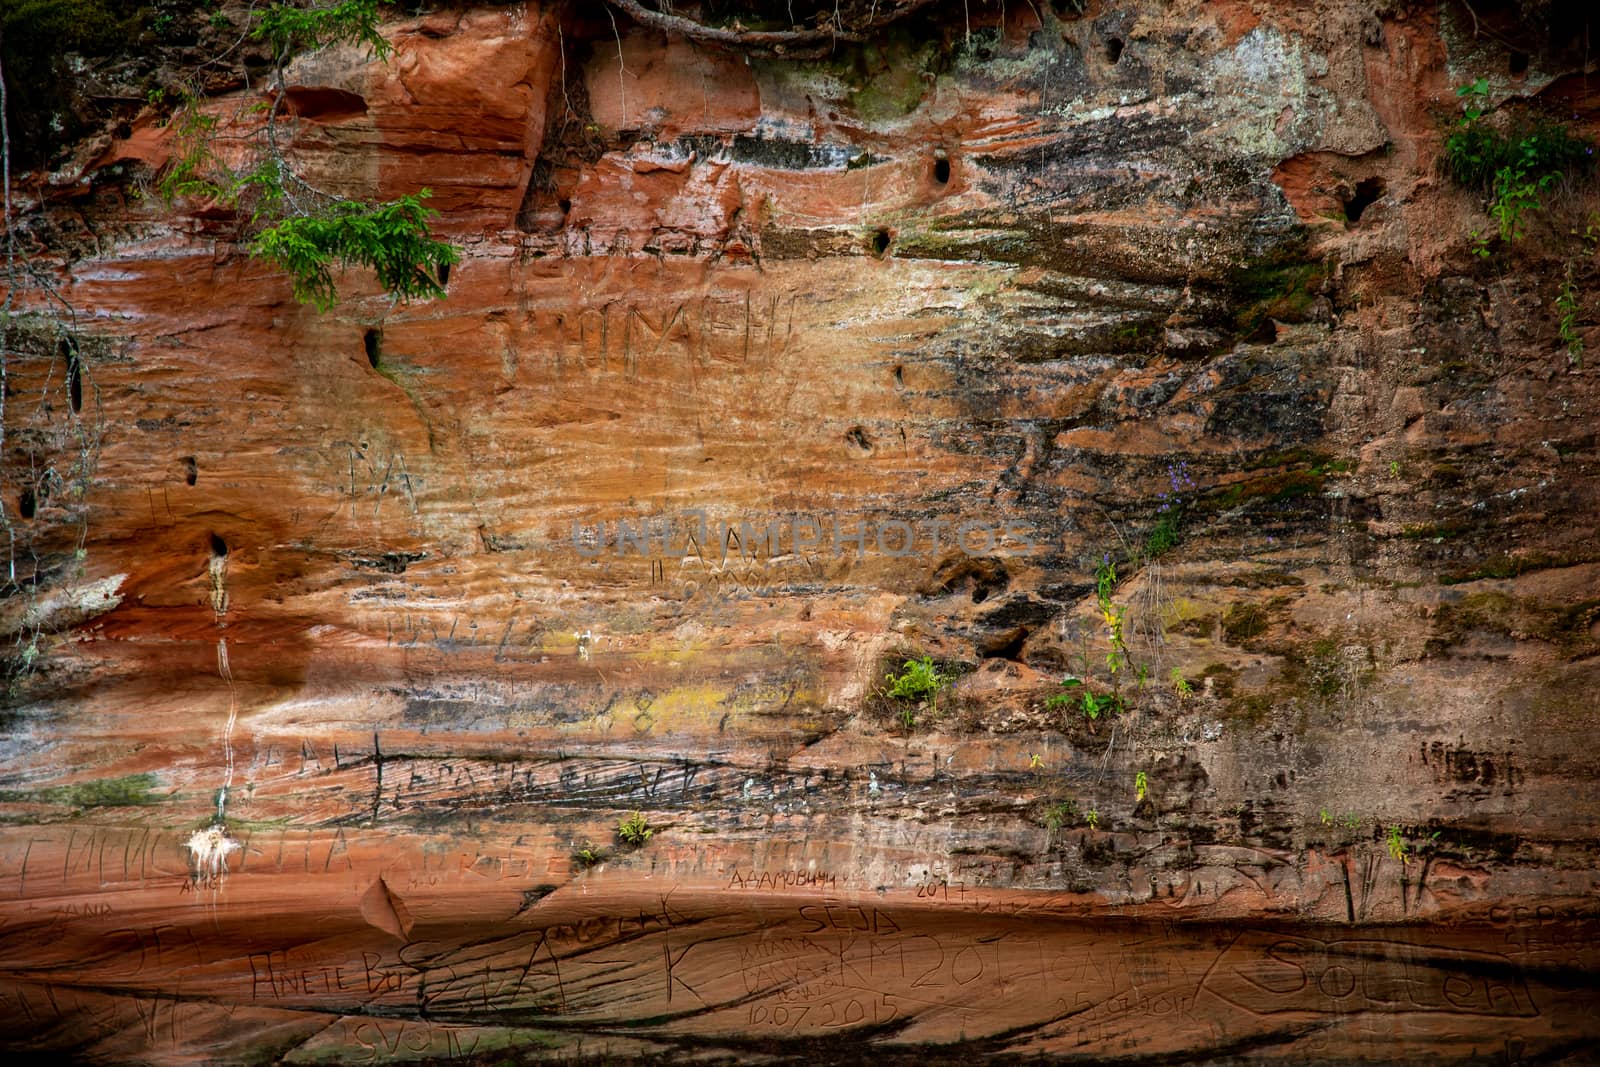 Closeup of sandstone cliff formation near the river Gauja in Latvia. Sedimentary rock consisting of sand or quartz grains cemented together.